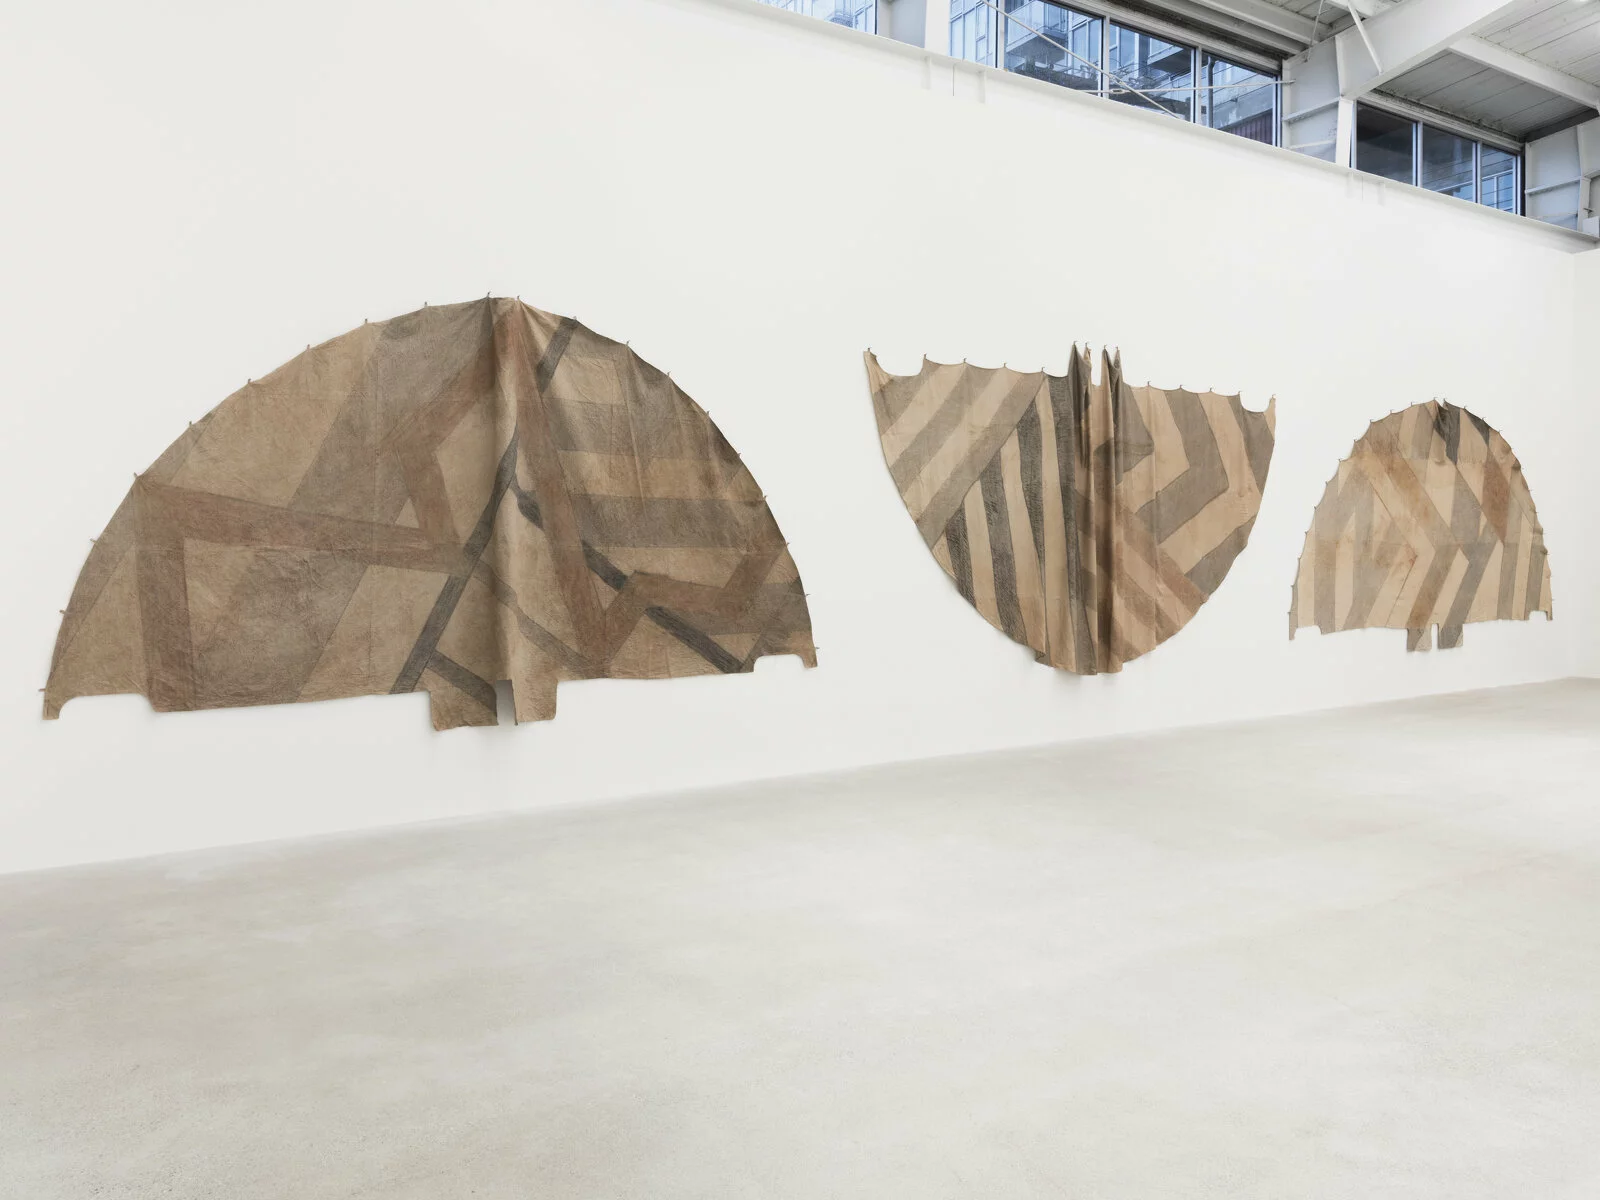 Duane Linklater, Tipi cover for new old geometries, 2018. Digital prints on hand-dyed linen, sumac, cedar, charcoal, nails; dimensions variable. Collection Museum of Contemporary Art Chicago, Gift of Marshall Field’s by exchange, 2023.7. Photo: Rachel Topham Photography. 2022/12/Linklater_3-tipi-covers-for-unknown-future-horizons_2018_Unexplained-Parade_CJ_Apr-10_2019_install_02.jpg 